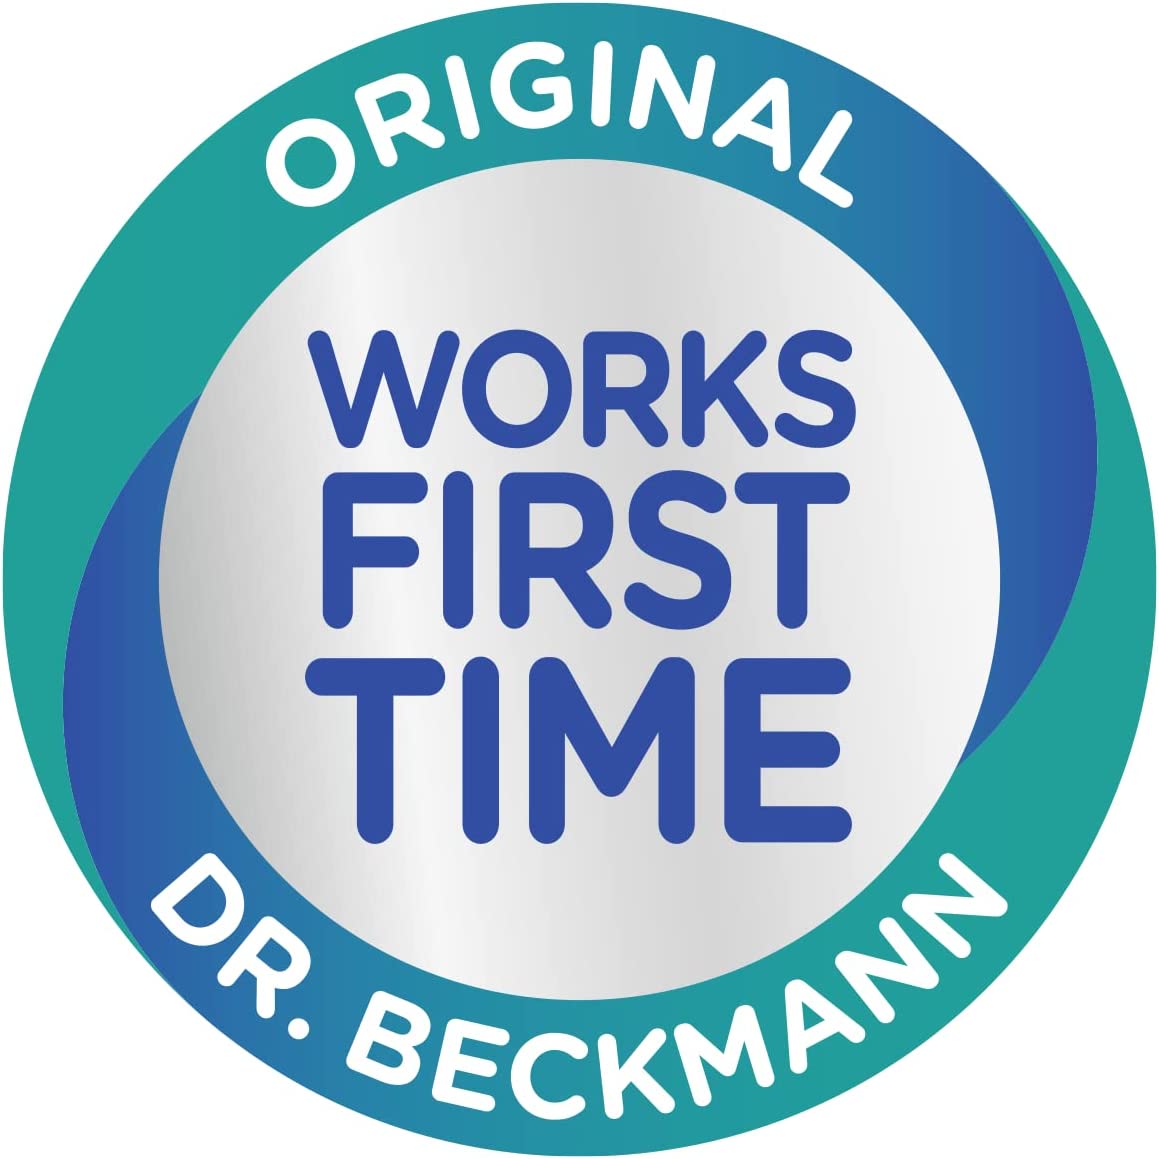 Dr. Beckmann Pet Stain & Odour Remover | Eliminates Stains and Odours Caused by Pets | Incl. Applicator Brush | 650 Ml - FoxMart™️ - Delta Pronatura Dr. Krauss & Dr.Beckmann KG